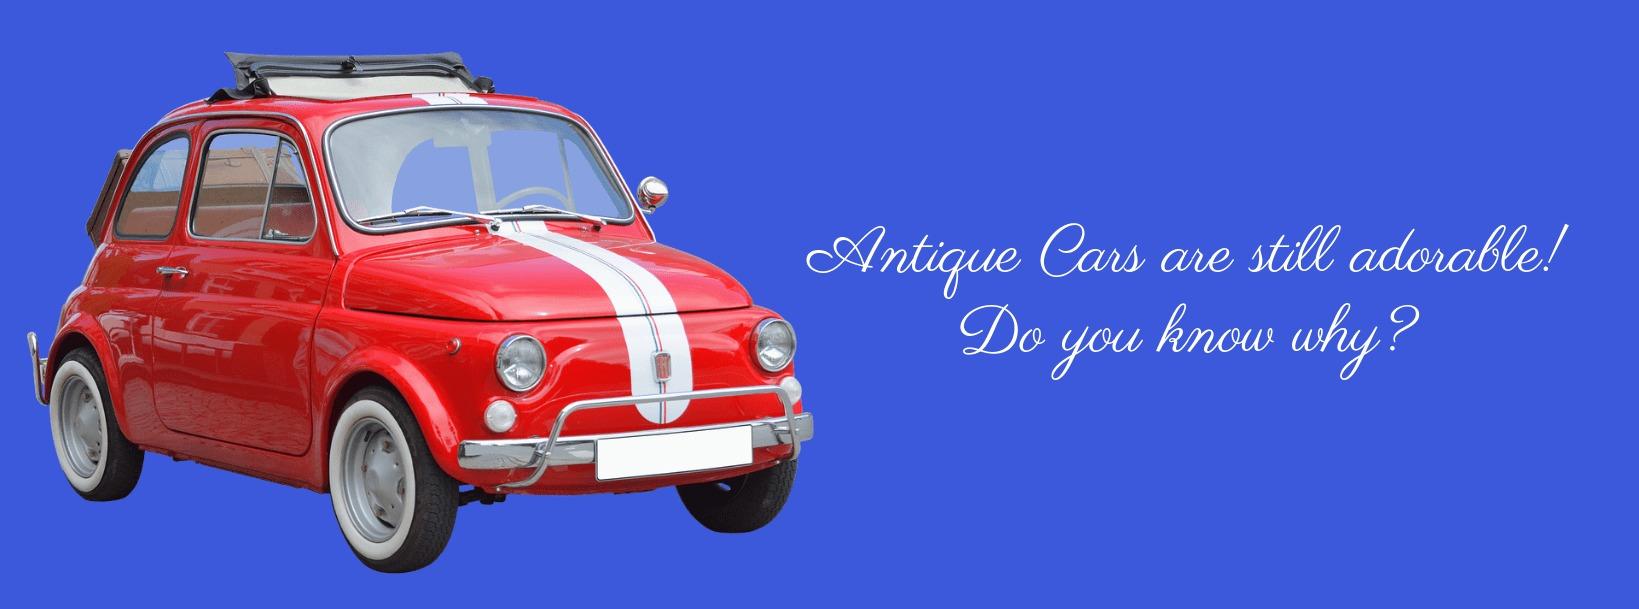 What Makes Old Cars Still Adorable In This Time Of Age?